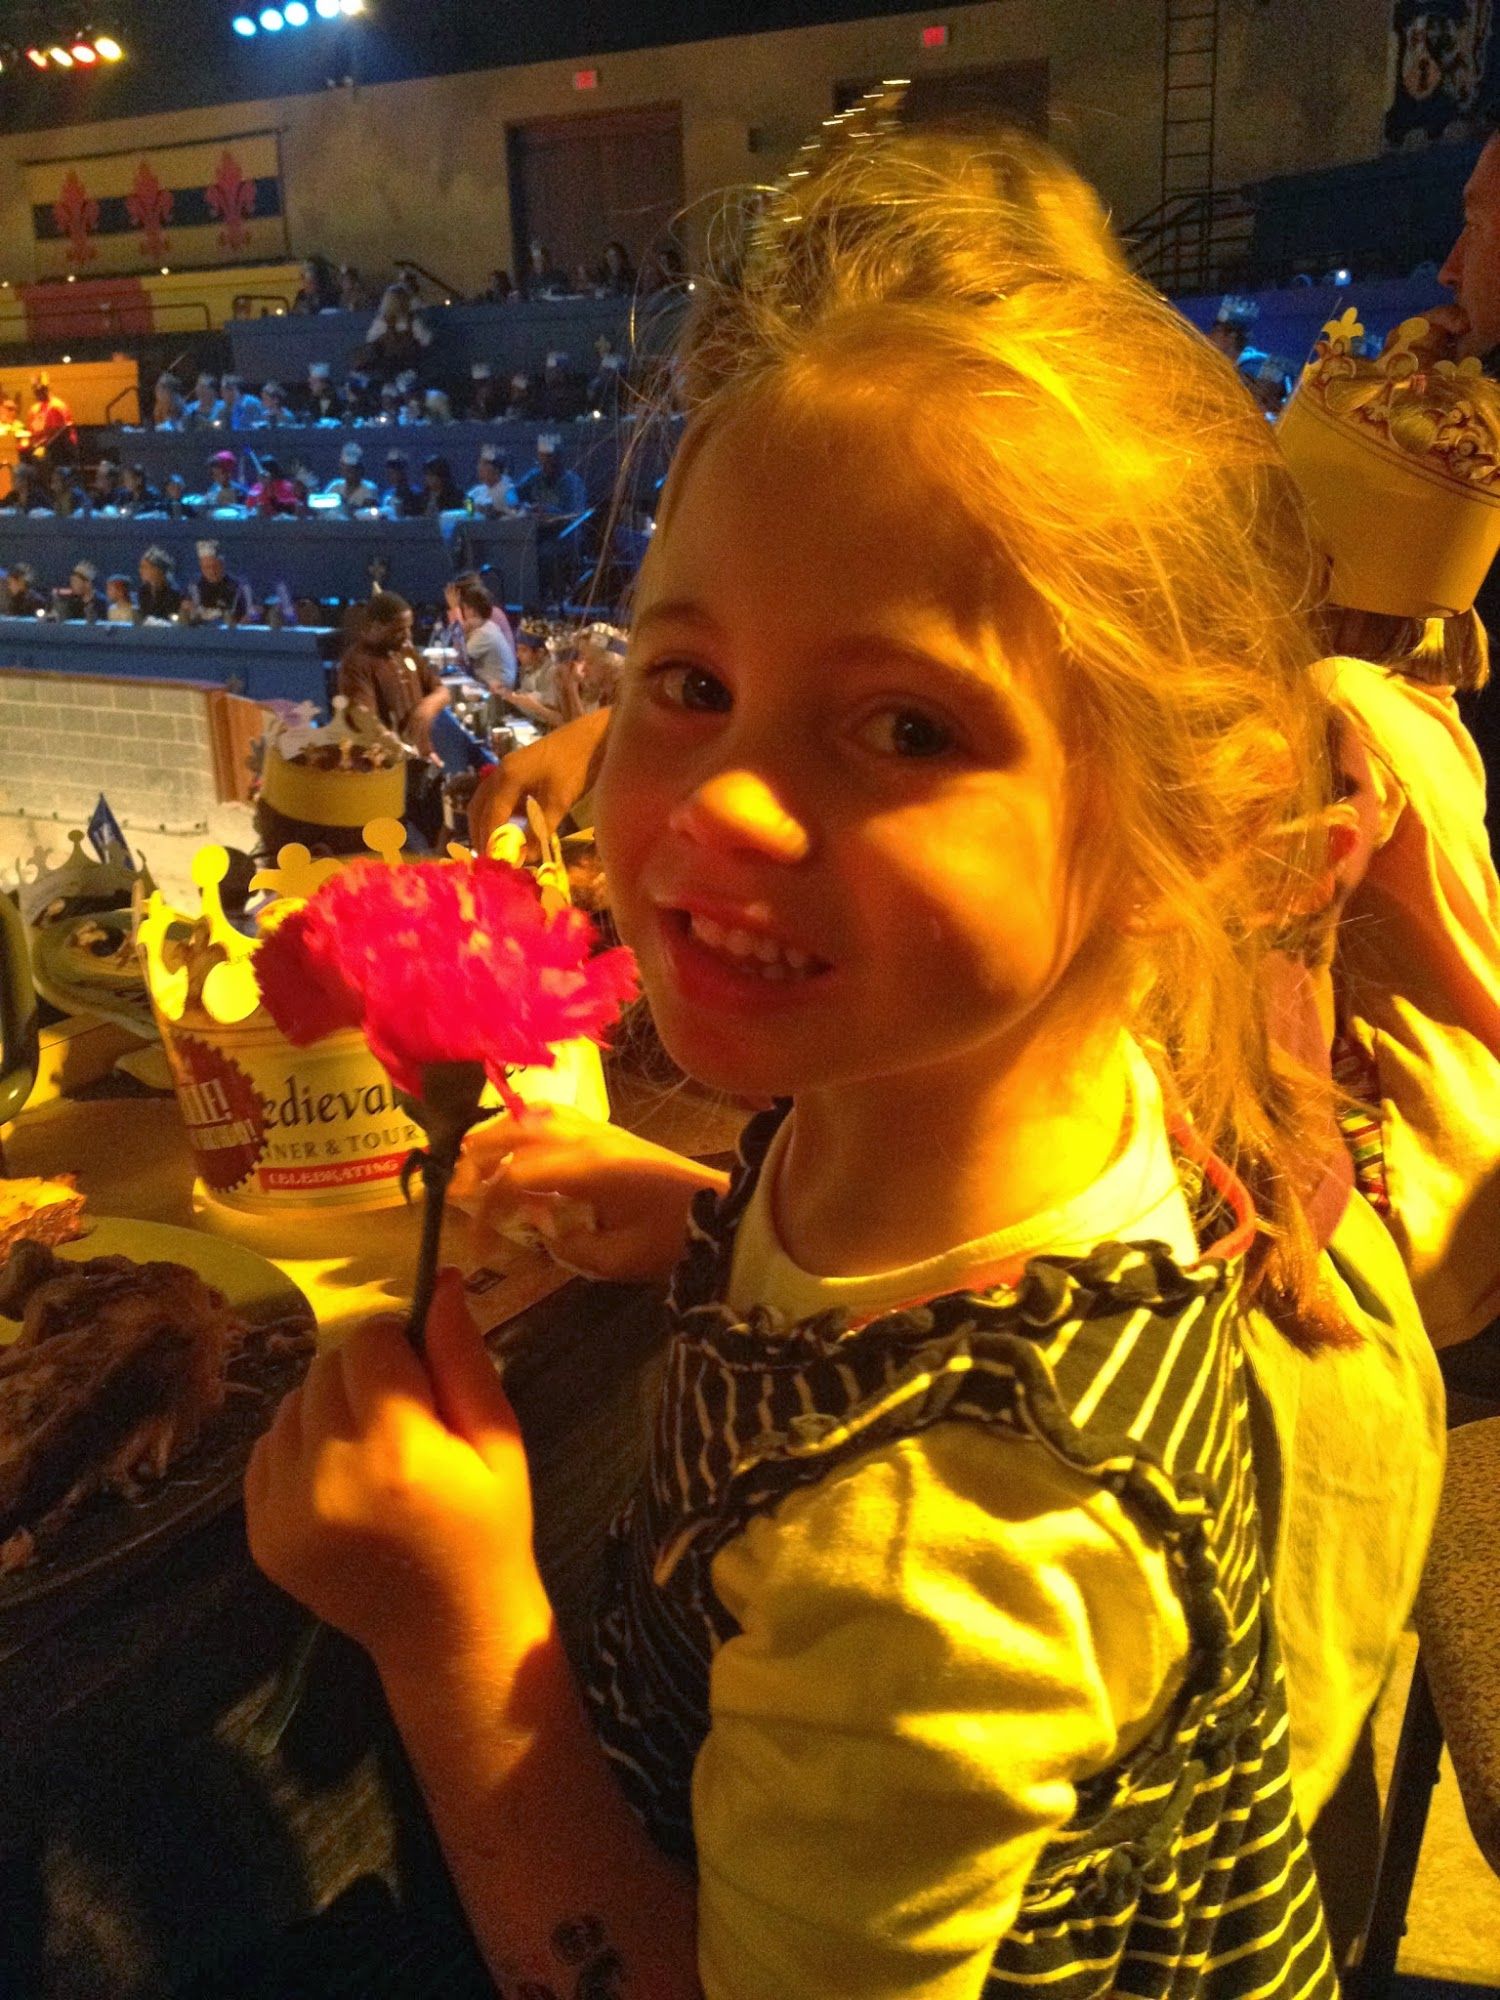  The Princess caught the flower from the yellow knight 